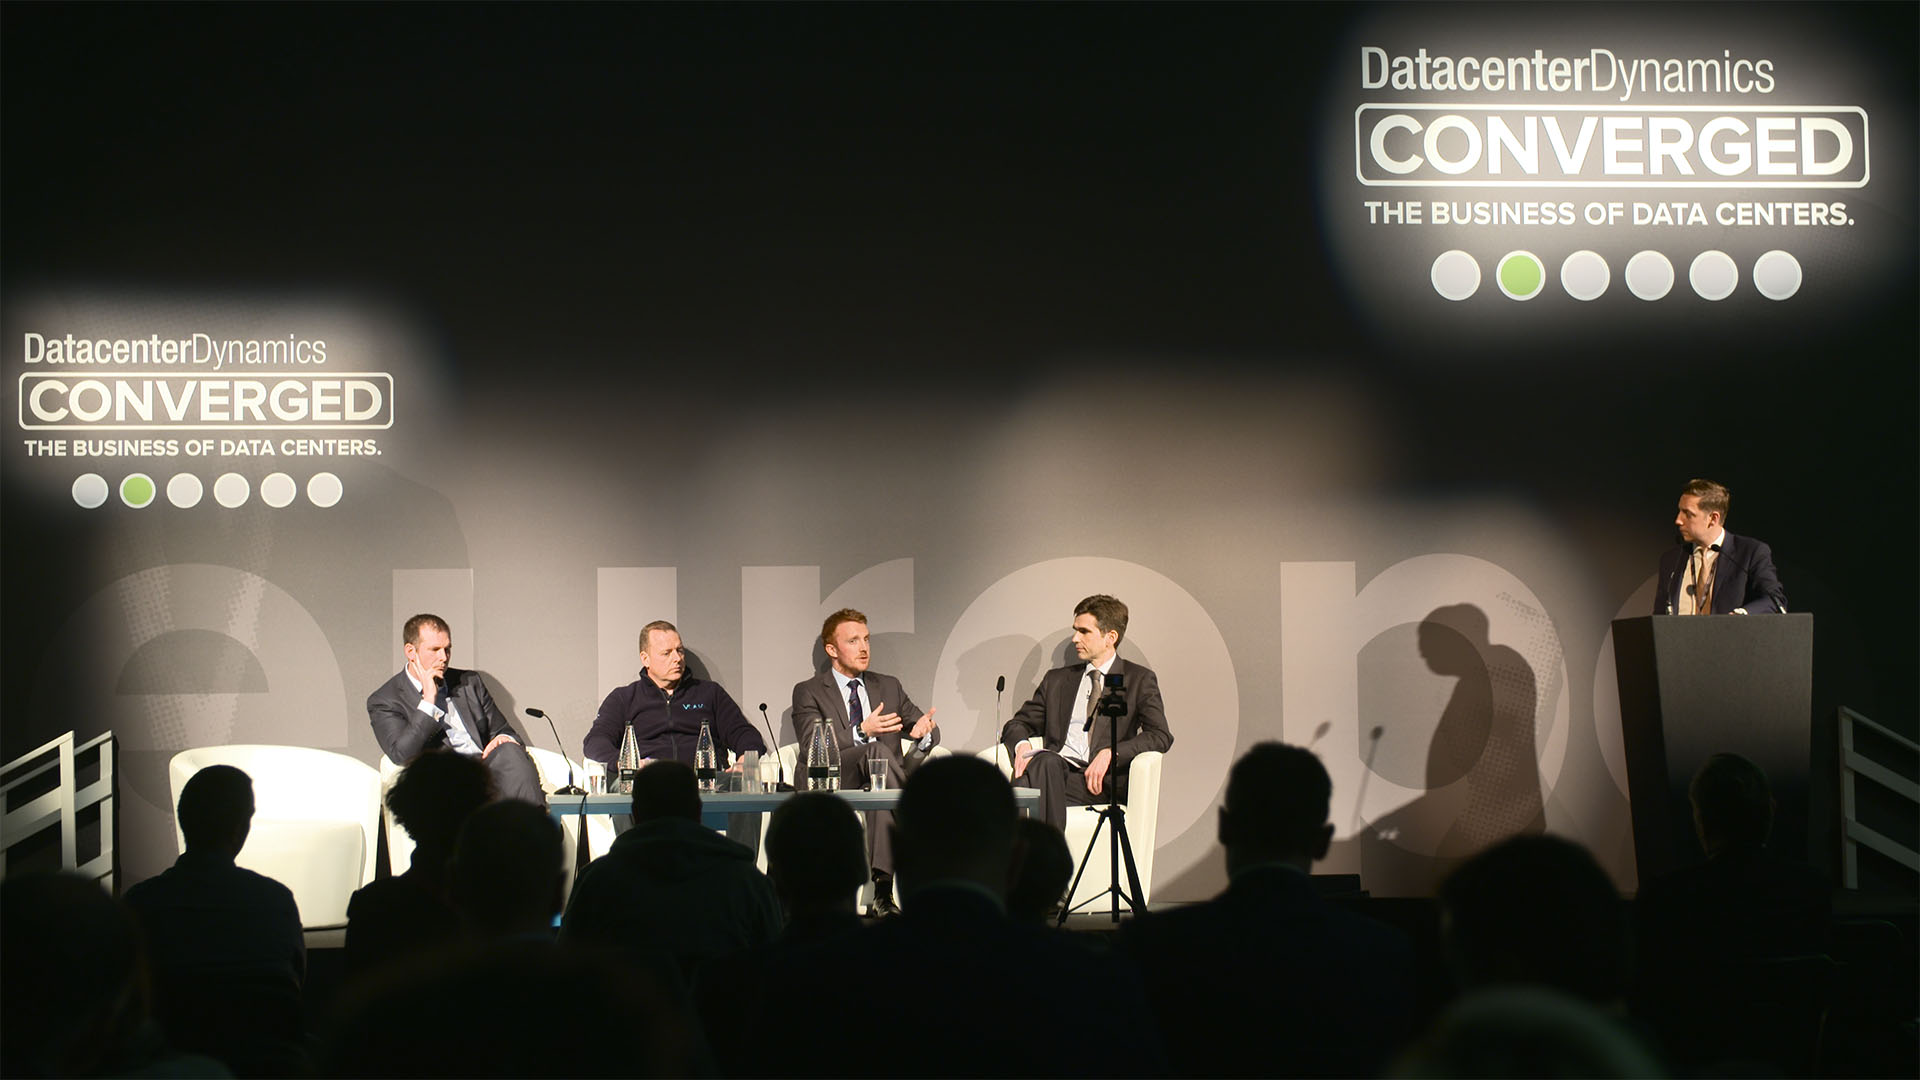 Panel Discussion at a Trade Show